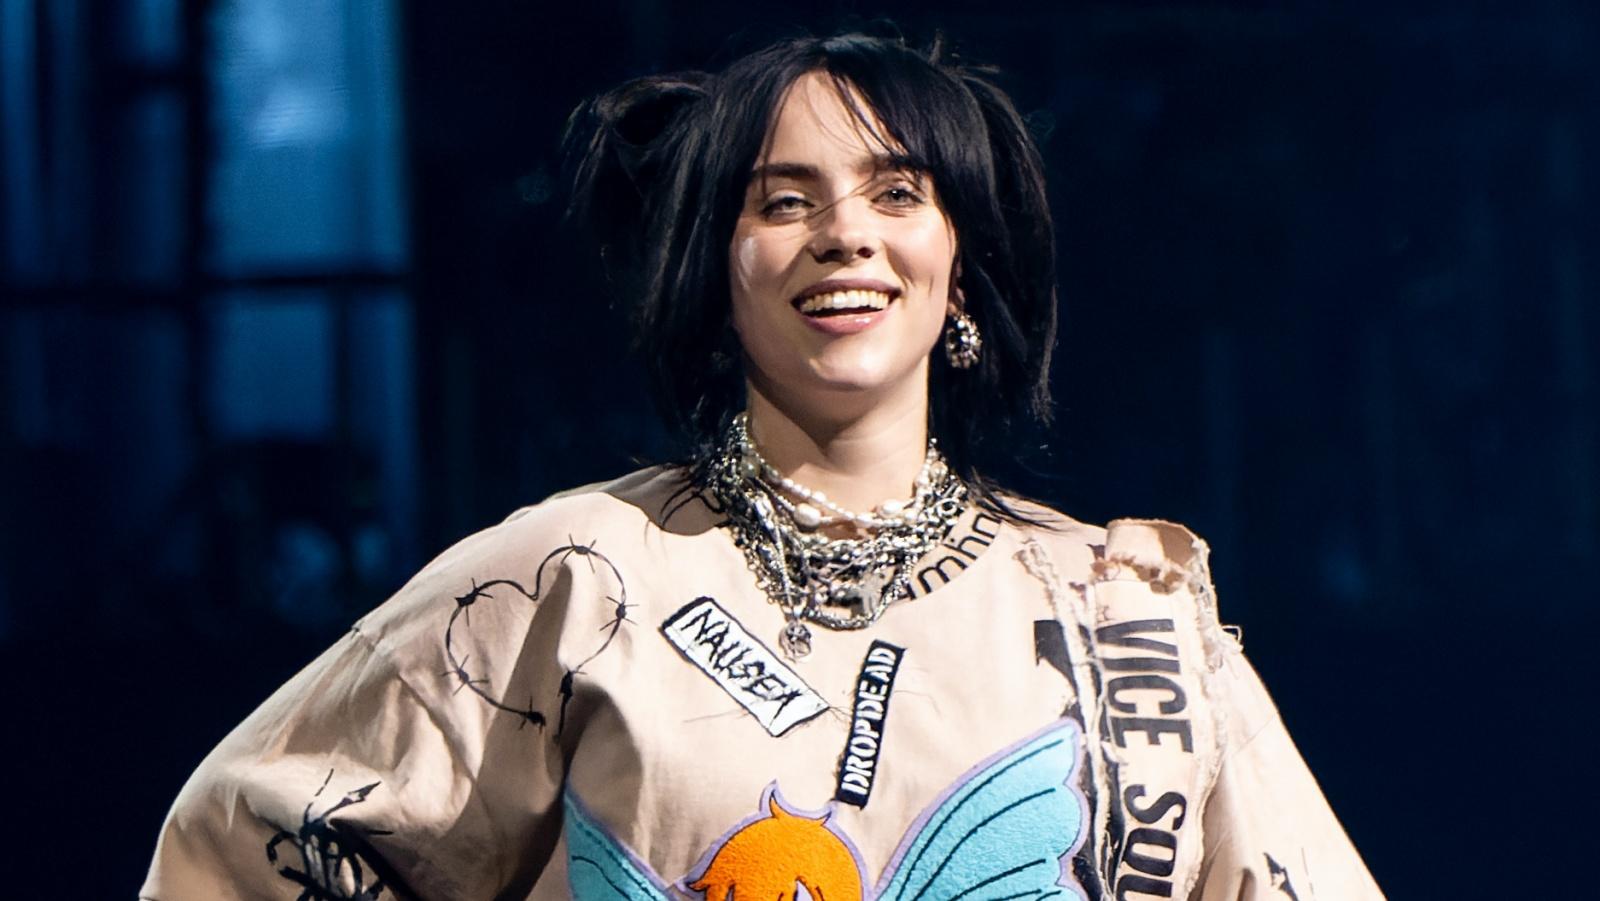 Billie Eilish with a graffiti shirt standing onstage in a concert